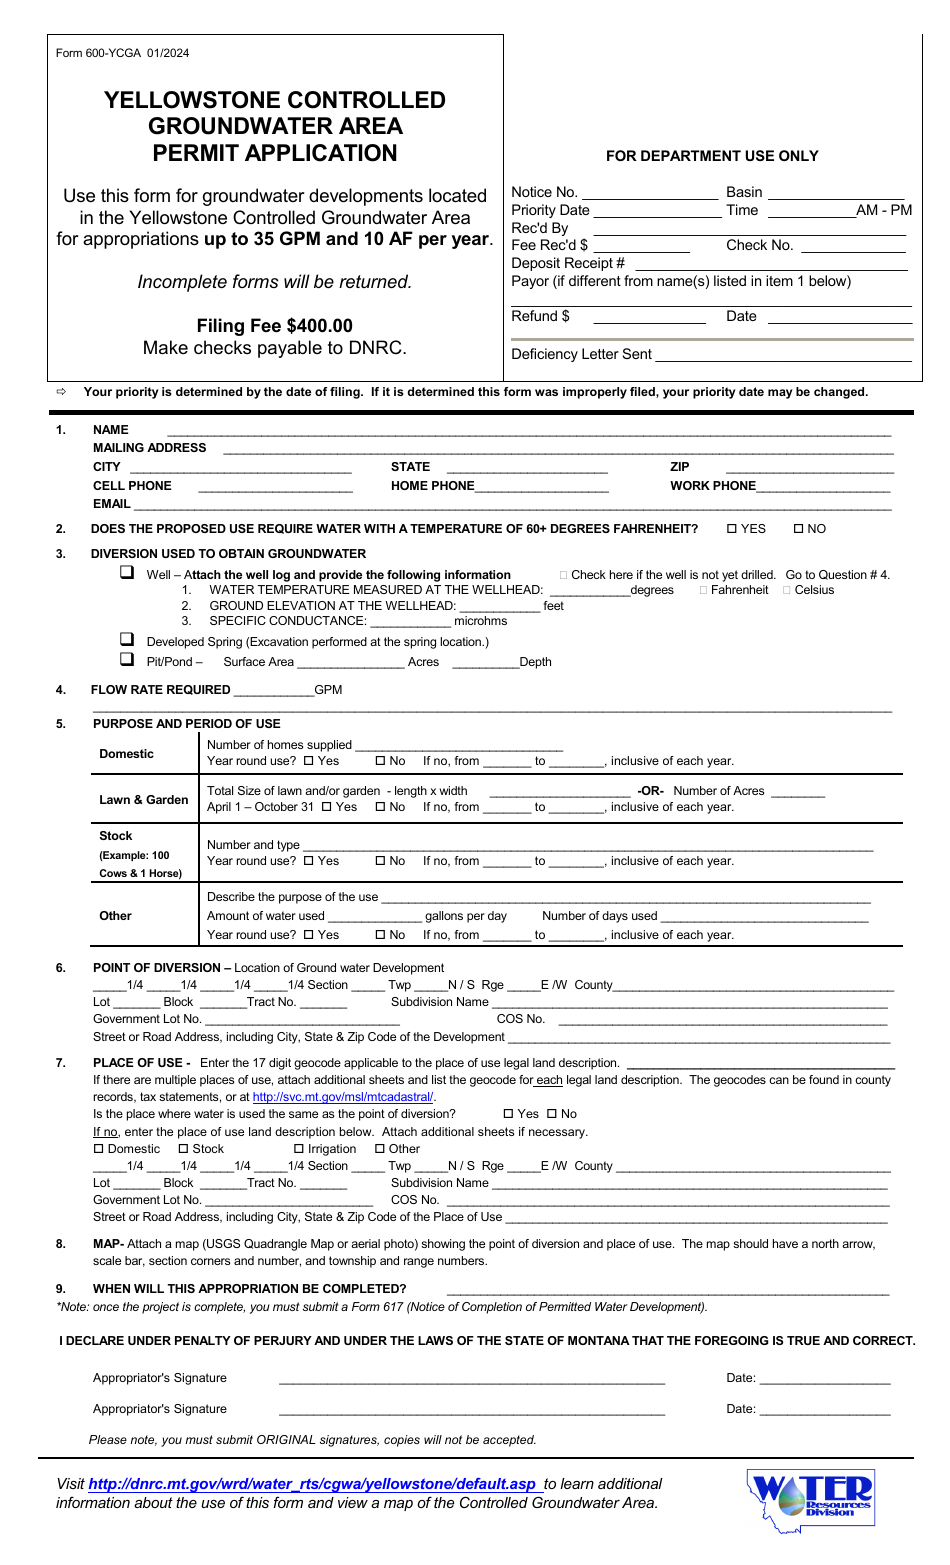 Form 600-YCGA Yellowstone Controlled Groundwater Area Permit Application - Montana, Page 1